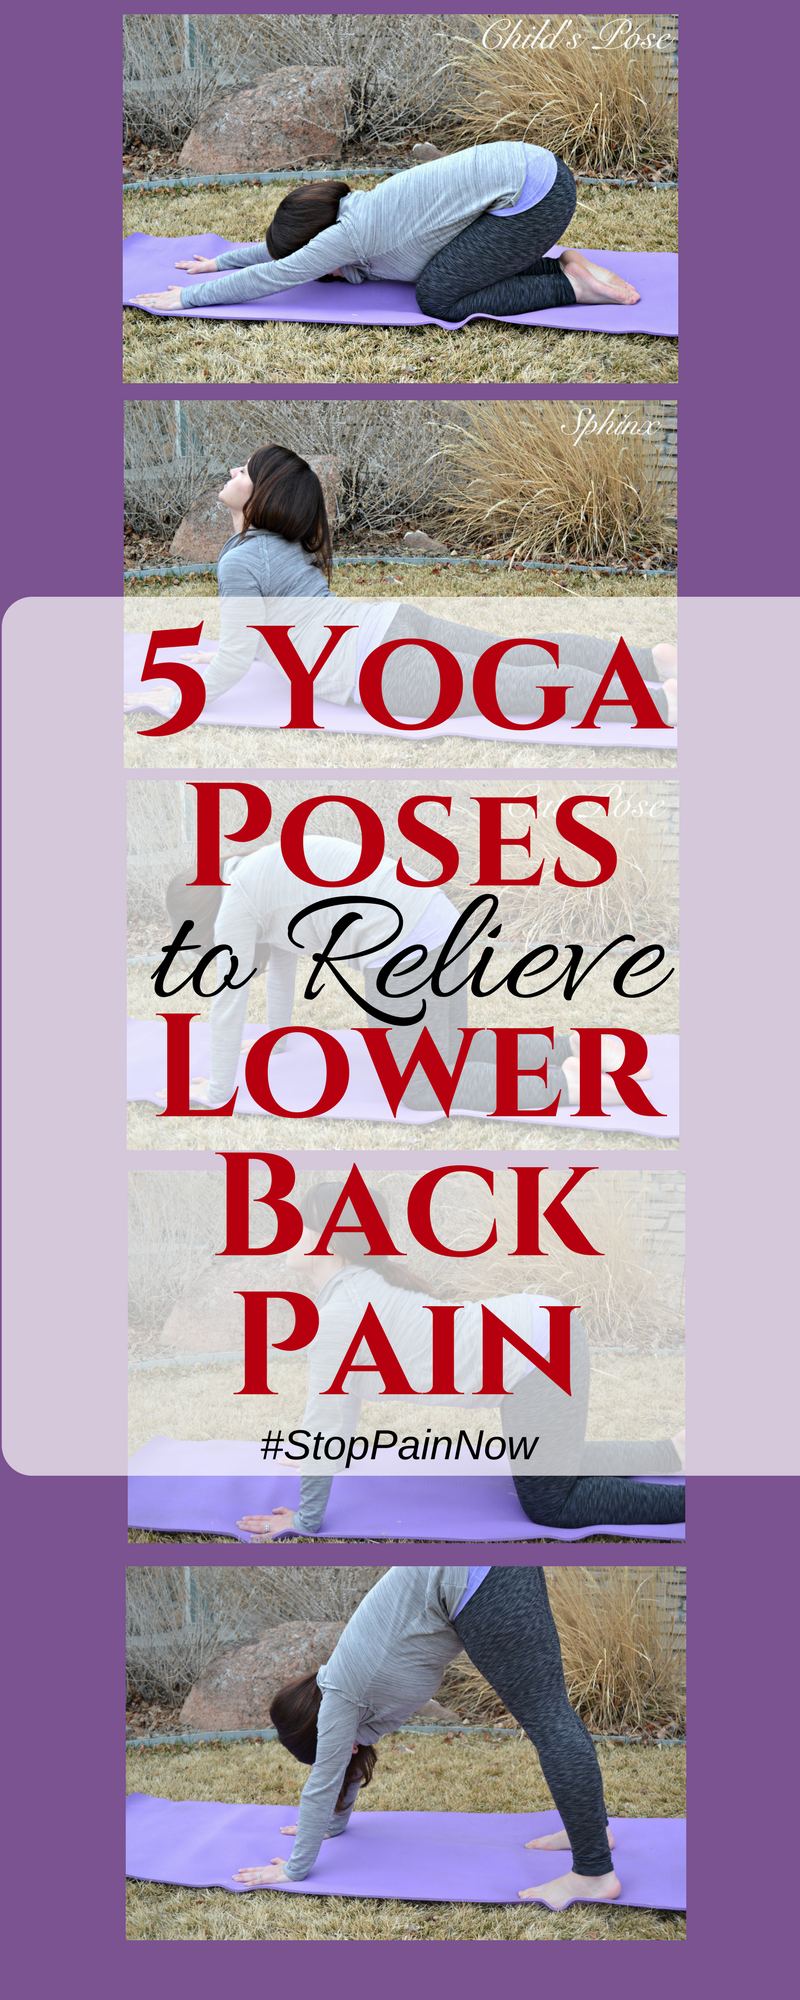 5 Yoga Poses to Help With Back Pain - If you've suffered from back pain this post is for your! Learn the yoga flow that will help you feel pain free again!